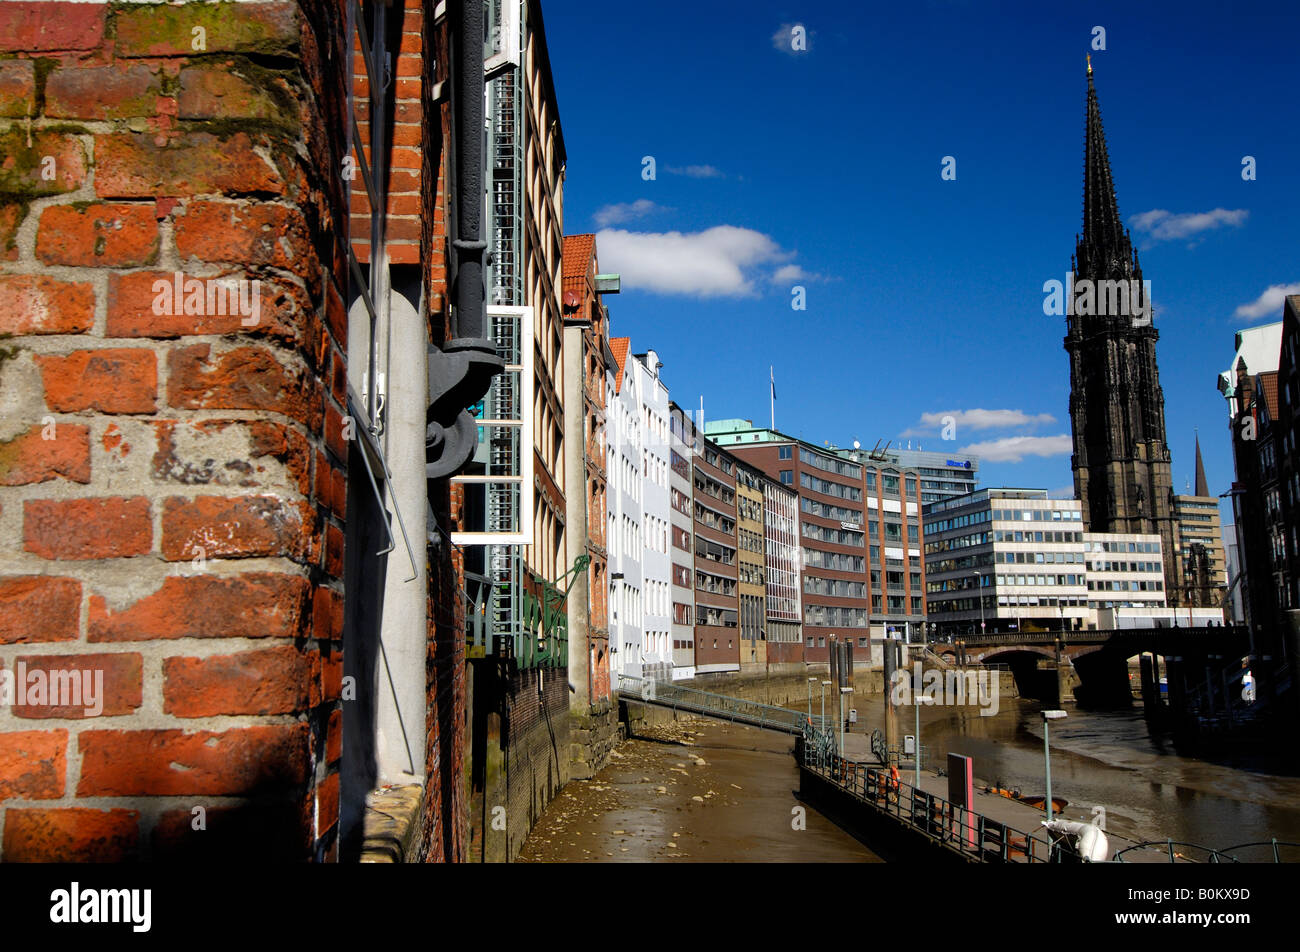 The historic houses at the Nikolai loading channel in Hamburg, Germany Stock Photo